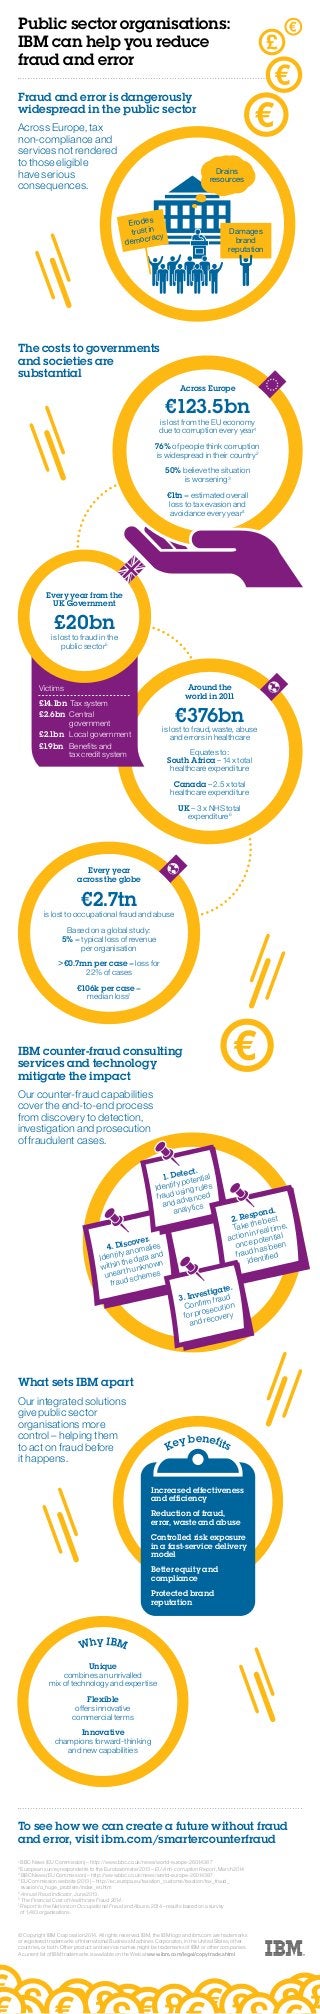 Public sector organisations: 
IBM can help you reduce 
fraud and error 
Fraud and error is dangerously 
widespread in the public sector 
Across Europe, tax 
non-compliance and 
services not rendered 
to those eligible 
have serious 
consequences. 
The costs to governments 
and societies are 
substantial 
Damages 
brand 
reputation 
Erodes 
trust in 
democracy 
Drains 
resources 
Across Europe 
€123.5bn 
is lost from the EU economy 
due to corruption every year1 
76% of people think corruption 
is widespread in their country2 
50% believe the situation 
€1tn = estimated overall 
loss to tax evasion and 
avoidance every year4 
Around the 
world in 2011 
€376bn 
is lost to fraud, waste, abuse 
and errors in healthcare 
South Africa – 14 x total 
healthcare expenditure 
Canada – 2.5 x total 
healthcare expenditure 
UK – 3 x NHS total 
Every year from the 
UK Government 
£20bn 
is lost to fraud in the 
public sector5 
Victims 
£14.1bn Tax system 
£2.6bn Central 
government 
£2.1bn Local government 
£1.9bn Benefits and 
tax credit system 
Every year 
across the globe 
€2.7tn 
is lost to occupational fraud and abuse 
Based on a global study: 
5% = typical loss of revenue 
per organisation 
>€0.7mn per case = loss for 
22% of cases 
€106k per case = 
median loss7 
IBM counter-fraud consulting 
services and technology 
mitigate the impact 
Our counter-fraud capabilities 
cover the end-to-end process 
from discovery to detection, 
investigation and prosecution 
of fraudulent cases. 
is worsening3 
Equates to: 
expenditure6 
1. D ete ct. 
Identif y potential 
fraud using rules 
and advanced 
4. Discover. 
Identif y anomalies 
within the data and 
unear th unknown 
fraud schemes 
What sets IBM apart 
Our integrated solutions 
give public sector 
organisations more 
control – helping them 
to act on fraud before 
it happens. 
Why IBM 
Unique 
combines an unrivalled 
analy tics 
2. Resp ond. 
Take the best 
action in real time, 
once potential 
fraud has been 
identified 
3. Investigate. 
Confirm fraud 
for prosecution 
and recover y 
Increased effectiveness 
and efficiency 
Reduction of fraud, 
error, waste and abuse 
Controlled risk exposure 
in a fast-service delivery 
model 
Better equity and 
compliance 
Protected brand 
reputation 
mix of technology and expertise 
Flexible 
offers innovative 
commercial terms 
Innovative 
champions forward-thinking 
and new capabilities 
Key benefits 
To see how we can create a future without fraud 
and error, visit ibm.com/smartercounterfraud 
1 BBC News (EU Commission) – http://www.bbc.co.uk/news/world-europe-26014387 
2 European survey respondents to the Eurobarometer 2013 – EU Anti-corruption Report, March 2014 
3 BBC News (EU Commission) – http://www.bbc.co.uk/news/world-europe-26014387 
4 EU Commission website (2013) – http://ec.europa.eu/taxation_customs/taxation/tax_fraud_ 
evasion/a_huge_problem/index_en.htm 
5 Annual Fraud Indicator, June 2013. 
6 The Financial Cost of Healthcare Fraud 2014. 
7 Report to the Nations on Occupational Fraud and Abuse, 2014 – results based on a survey 
of 1,483 organisations. 
© Copyright IBM Corporation 2014. All rights reserved. IBM, the IBM logo and ibm.com are trademarks 
or registered trademarks of International Business Machines Corporation, in the United States, other 
countries, or both. Other product and service names might be trademarks of IBM or other companies. 
A current list of IBM trademarks is available on the Web at www.ibm.com/legal/copytrade.shtml 
